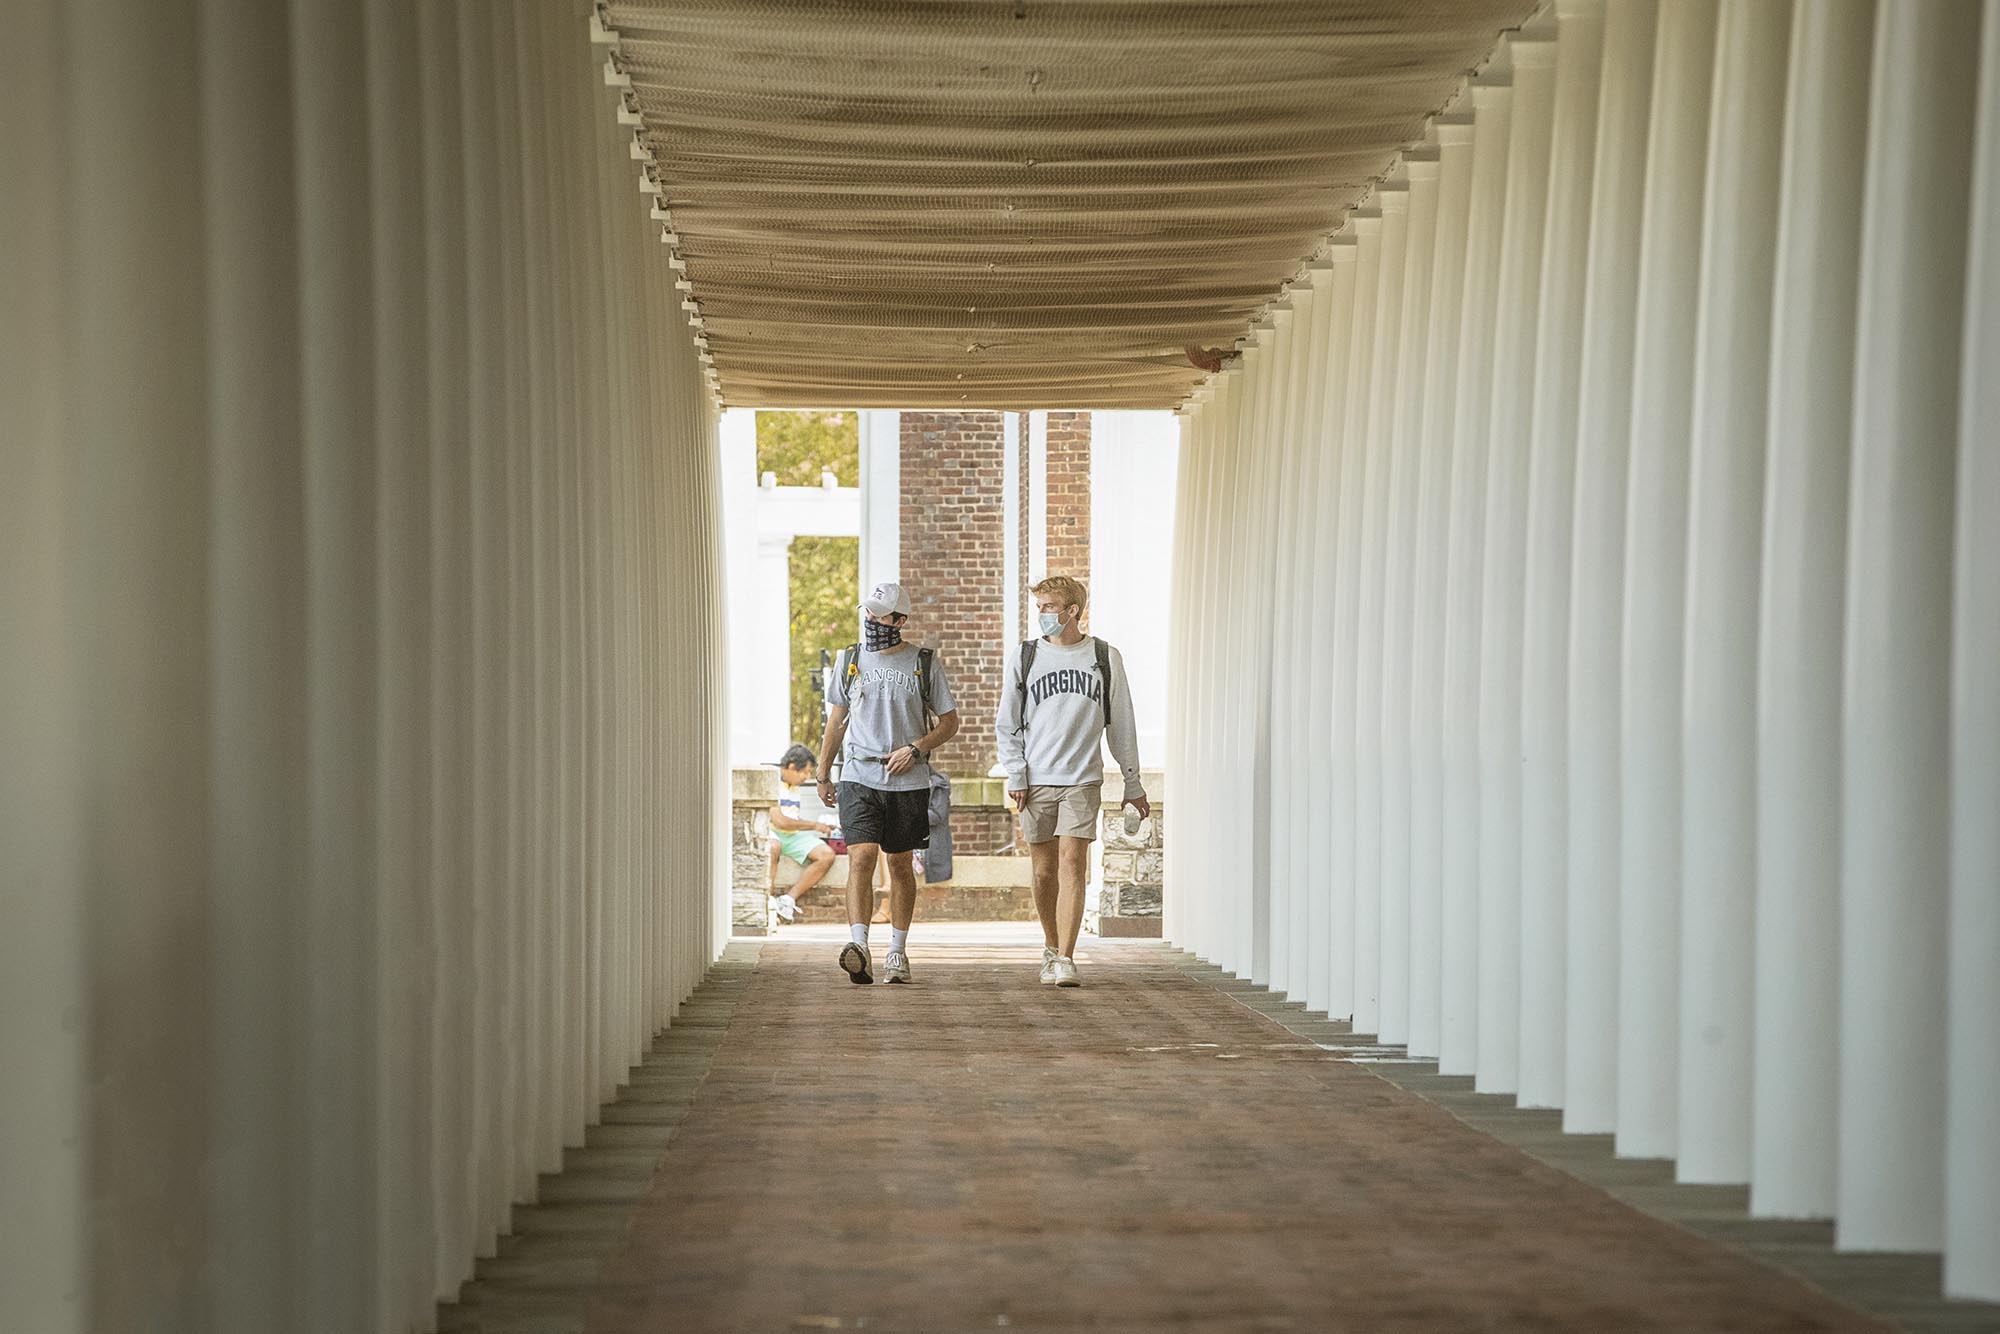 Two people walking on a covered walkway lined with tall whit columns